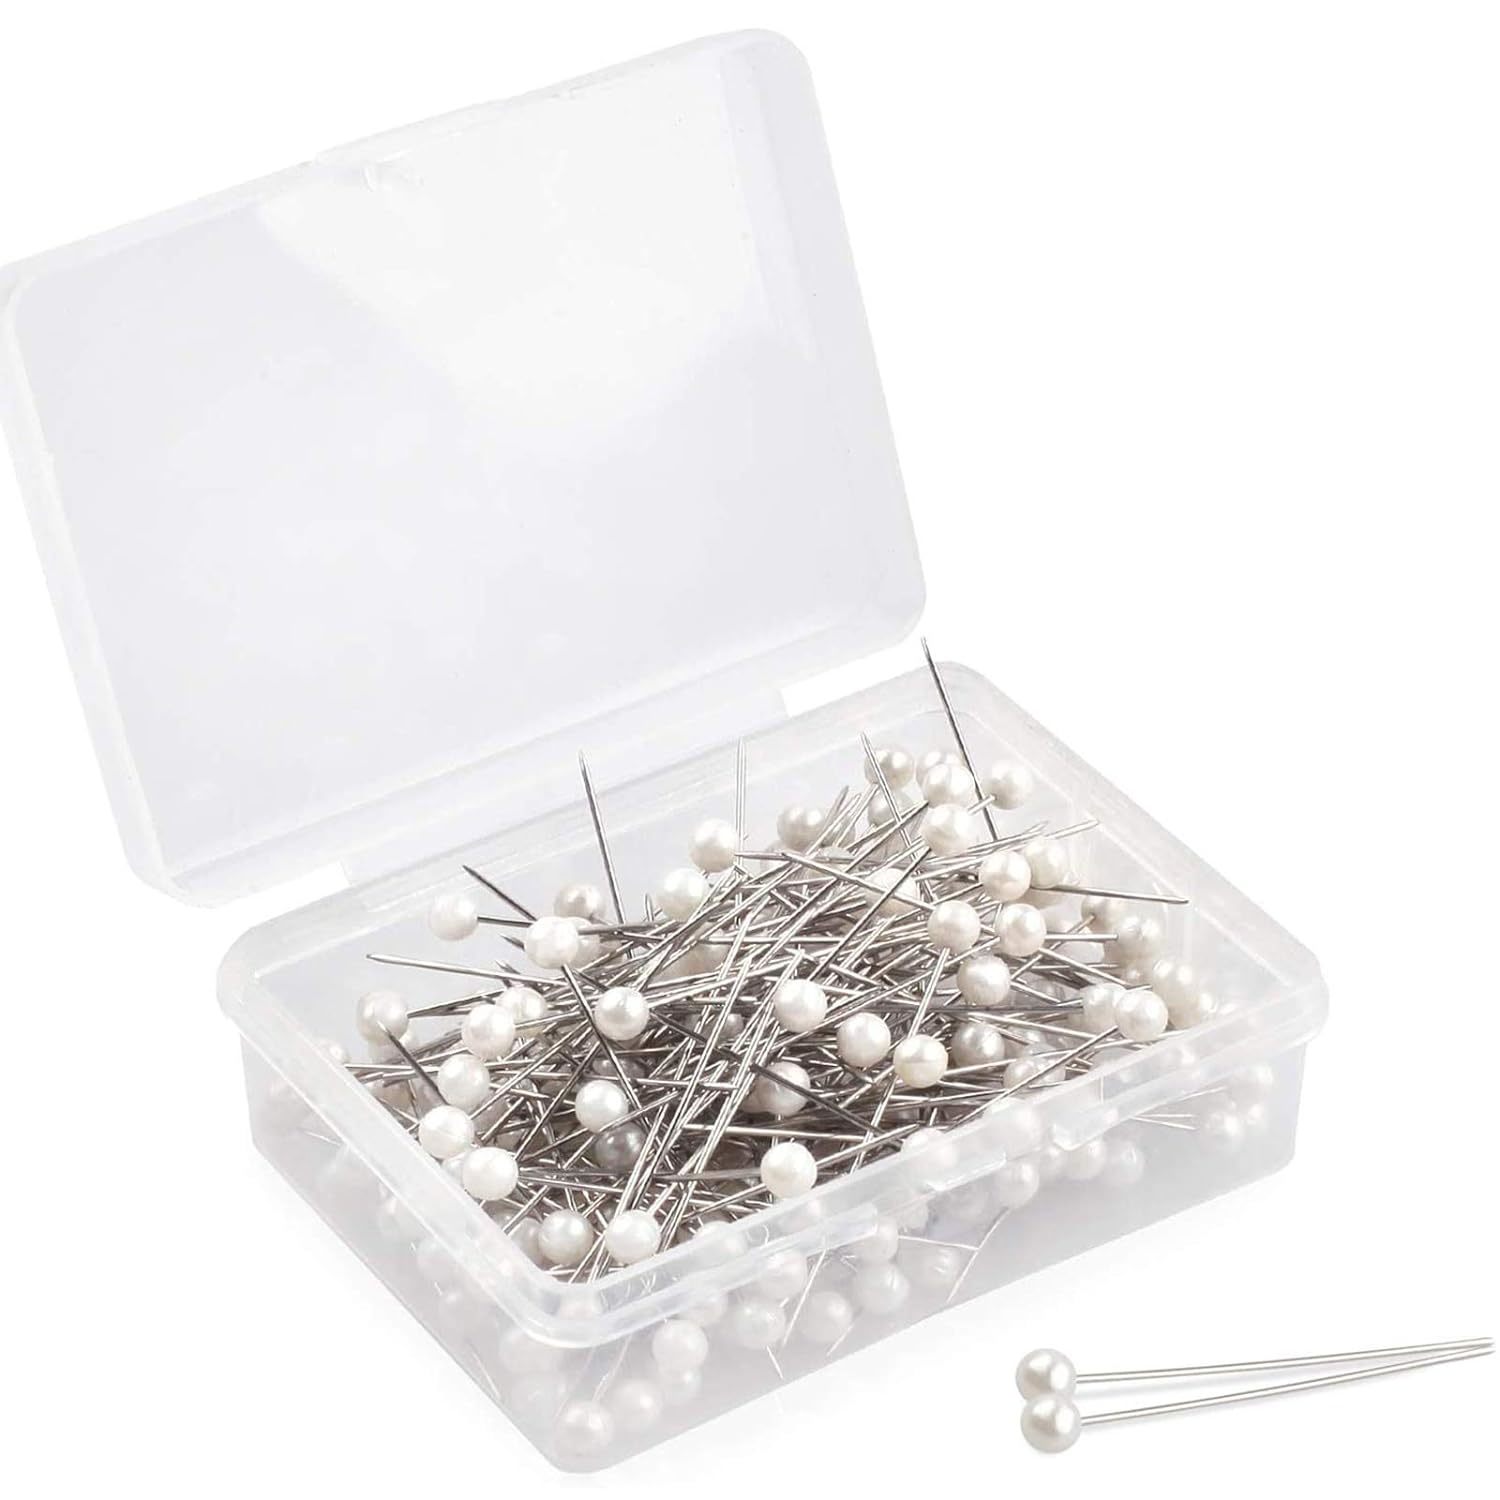 Singer Pearlized Head Straight Pins-Size 24 300/Pkg